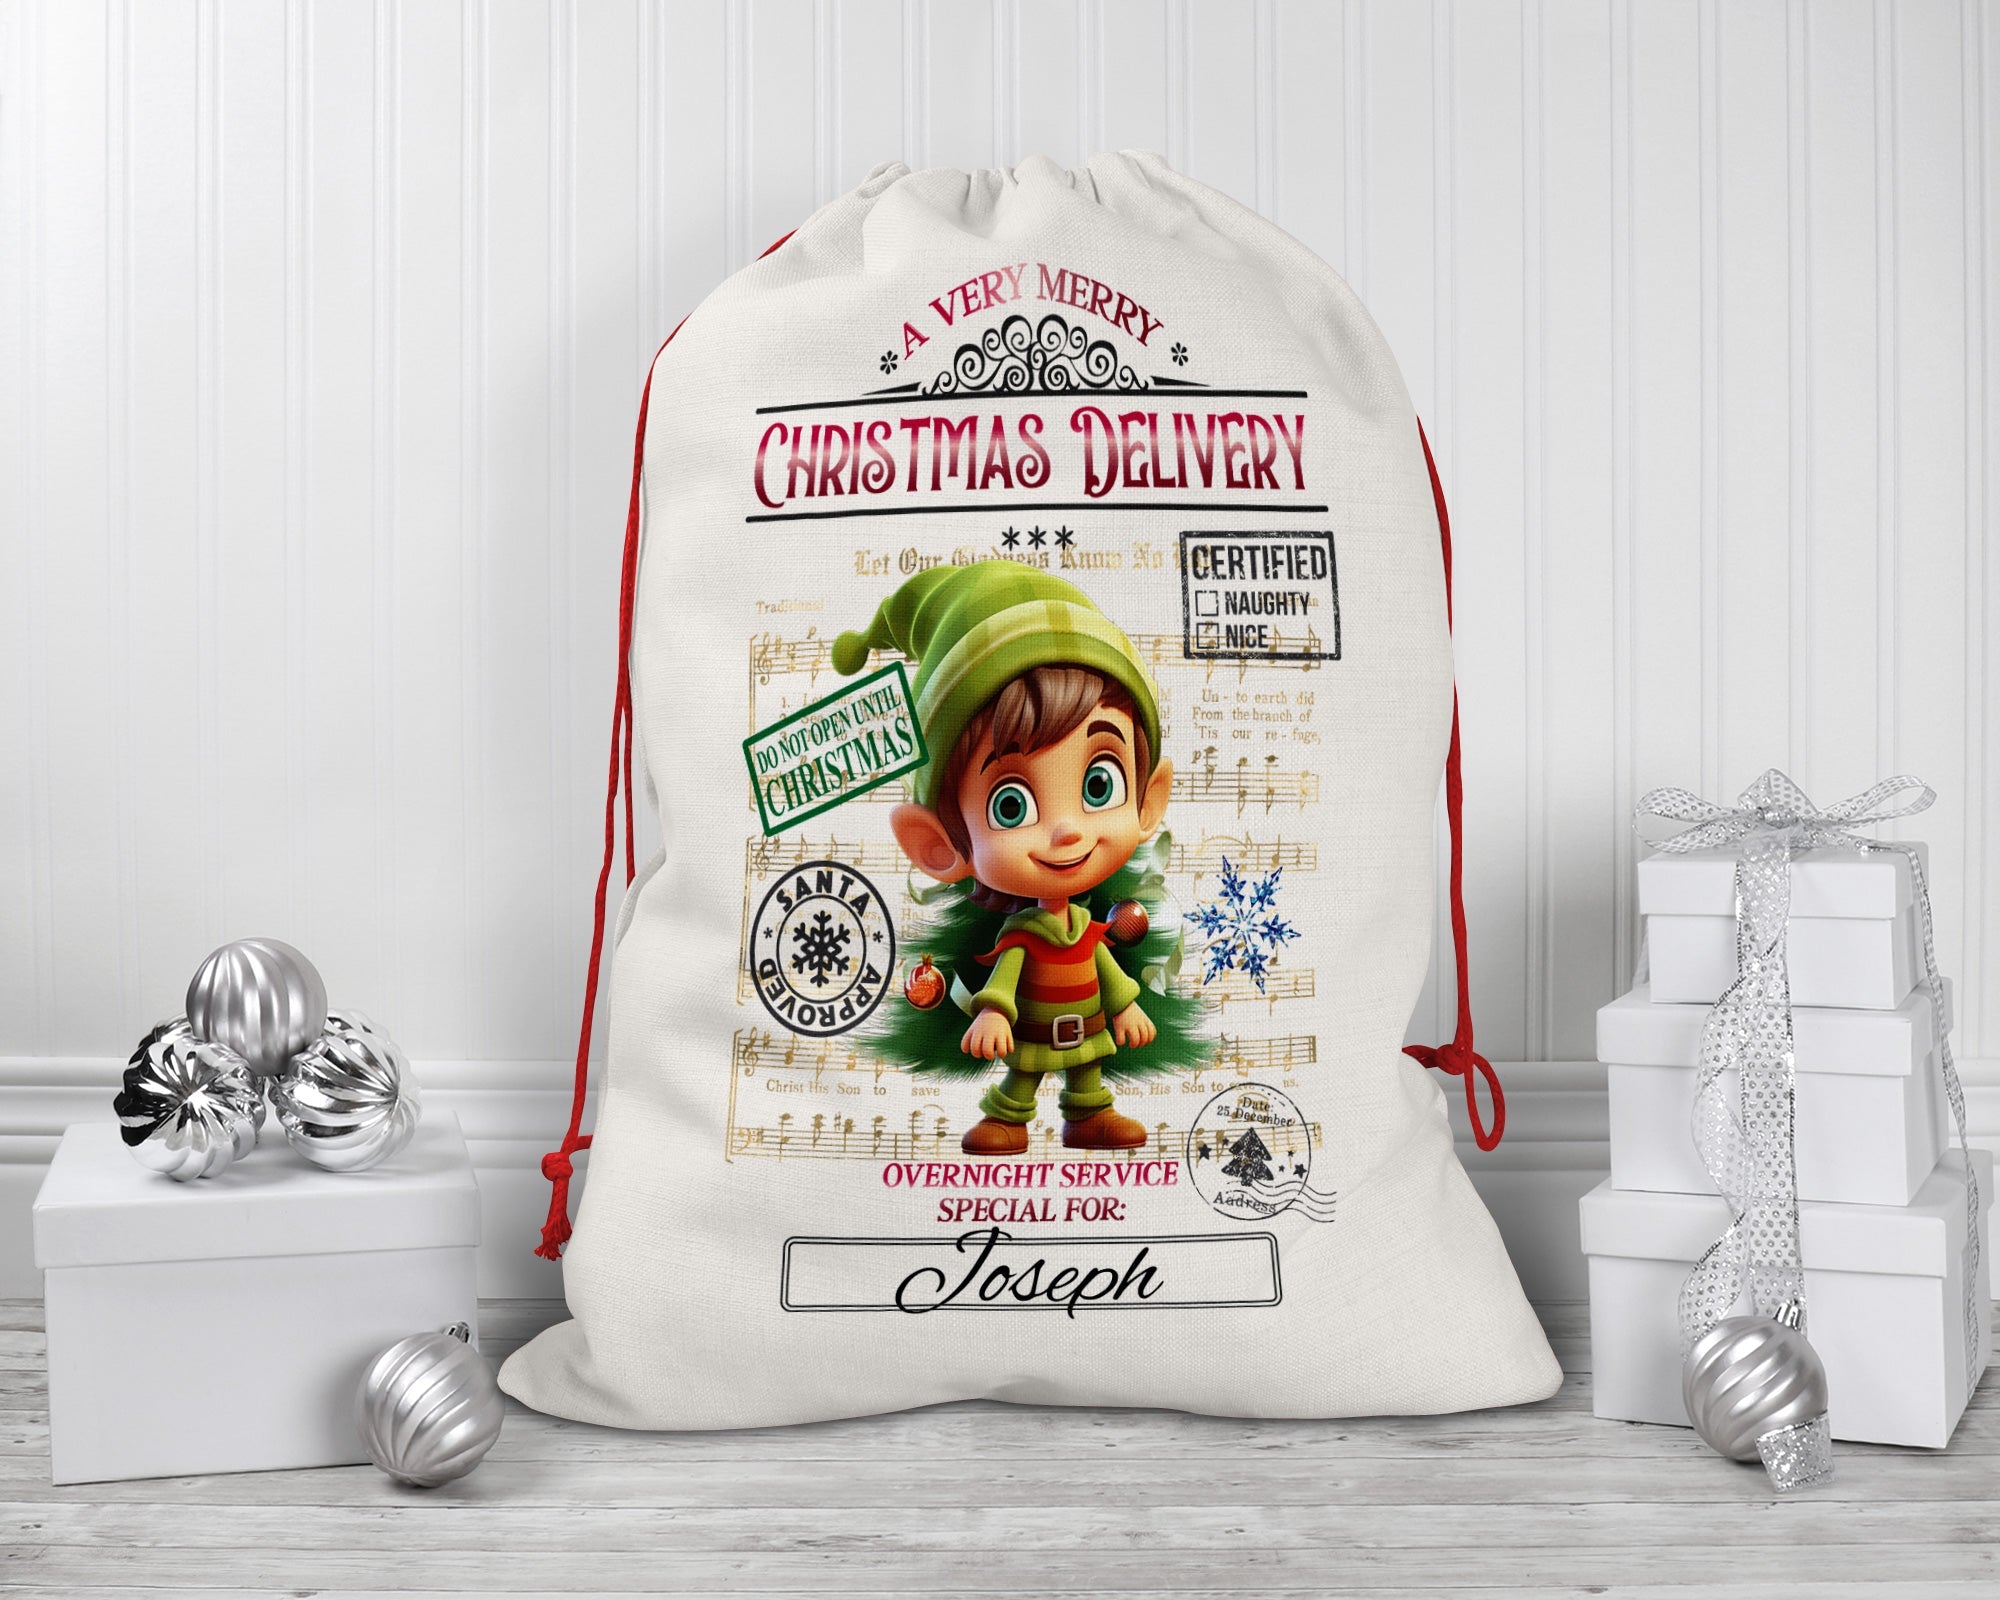 Personalized Santa Sack - Extra Large with Drawstring - Christmas Delivery Elf